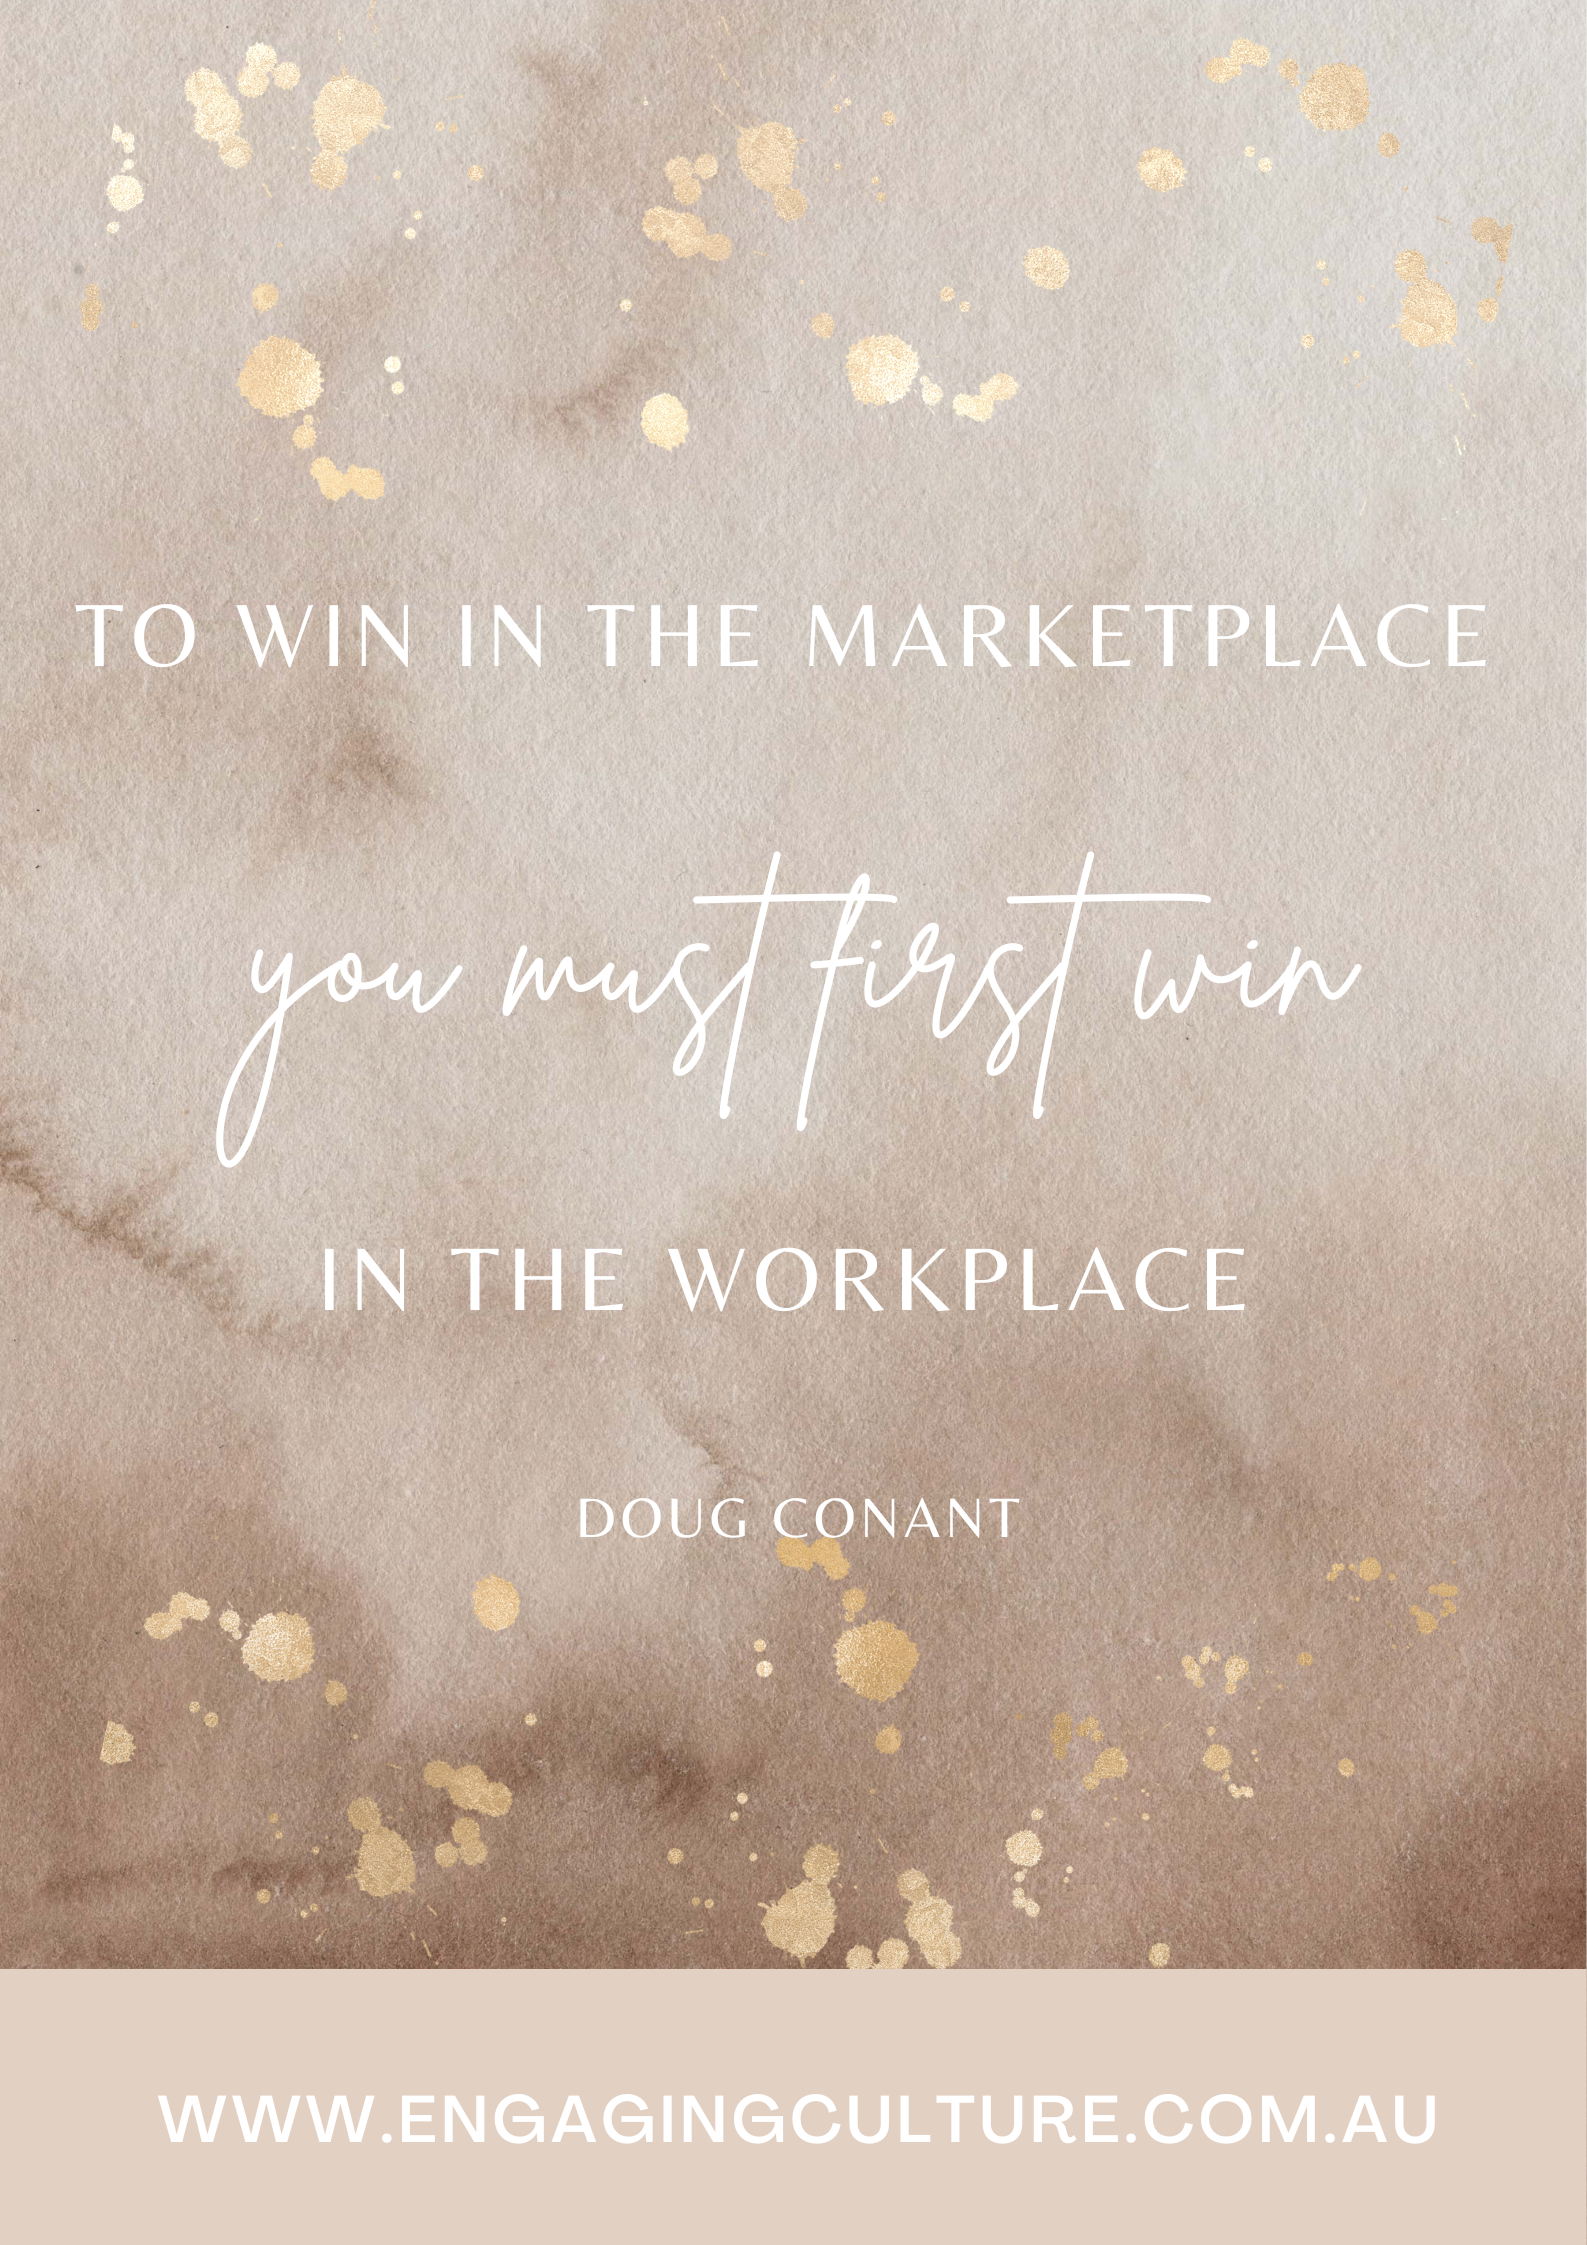 To win in the marketplace, you must first win in the workplace